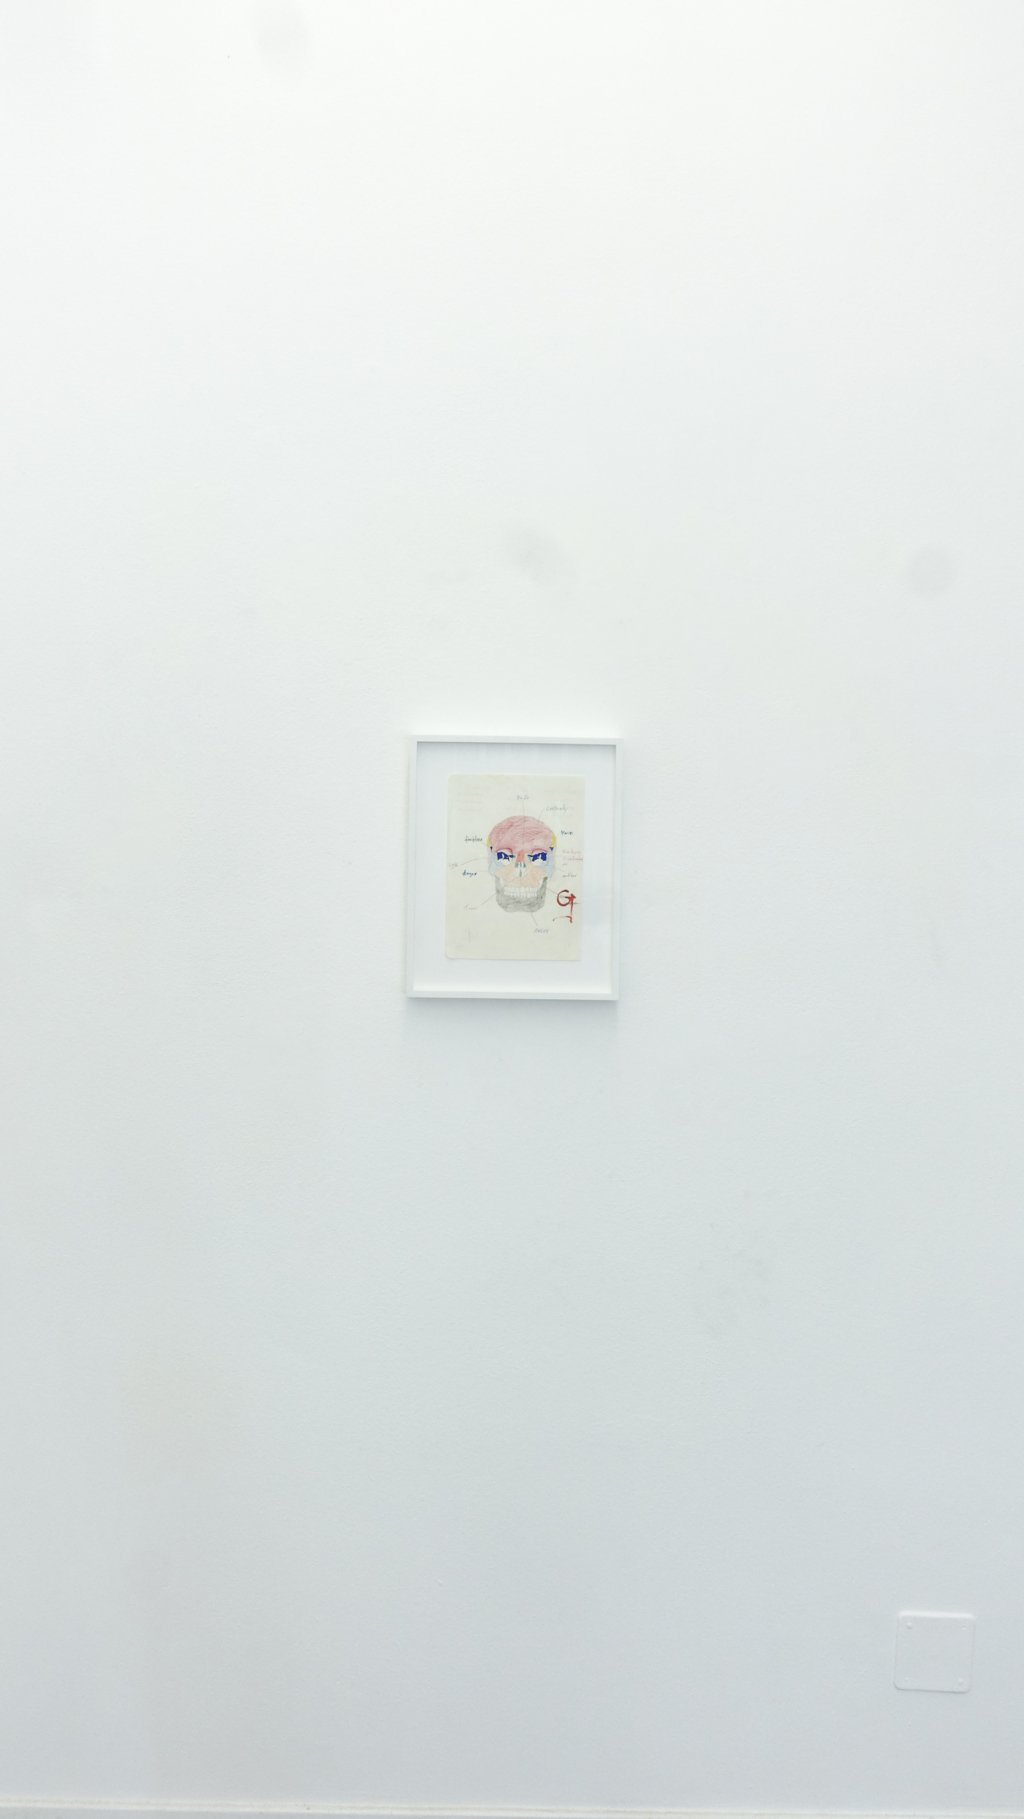 Marvin Luvualu Antonio, Untitled, 2024, Forbidden Relics, Ink, acrylic, pencil on paper, 25.4 x 19.1 cm, framed. 